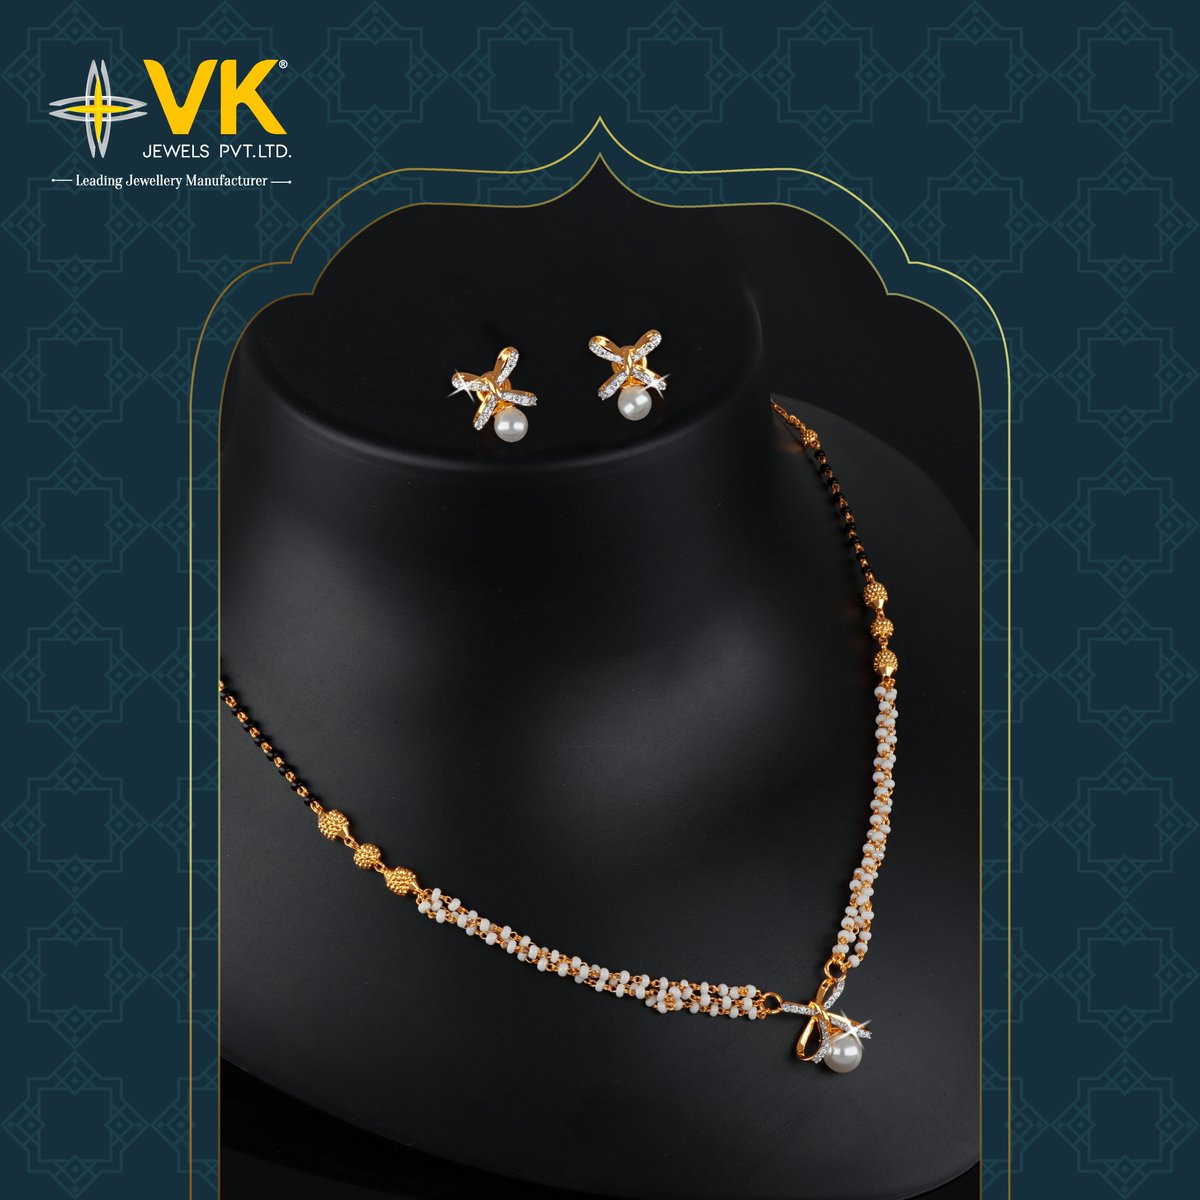 Mesmerizing mastery, The Mangalsutra gleams with artistry brilliance, capturing hearts and illuminating enduring love and timeless elegance!

#Mangalsutra #mangalsutradesign #mangalsutracollection #wedding #bride #rituals #GoldJewelry #ring #style #VK #vkjewels #India